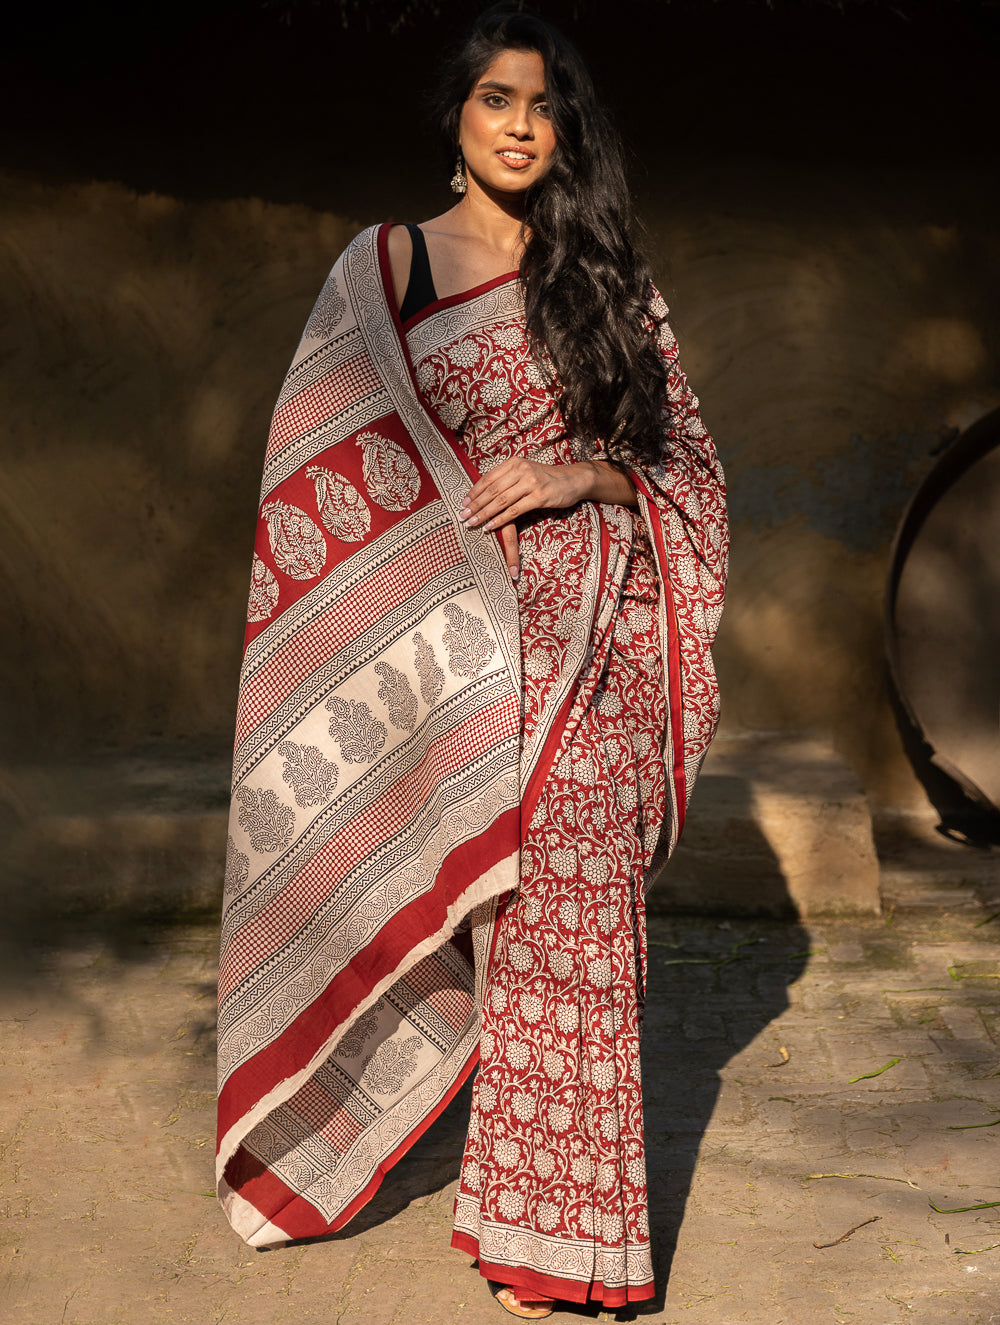 Load image into Gallery viewer, Exclusive Bagh Hand Block Printed Cotton Saree - Floral Medley